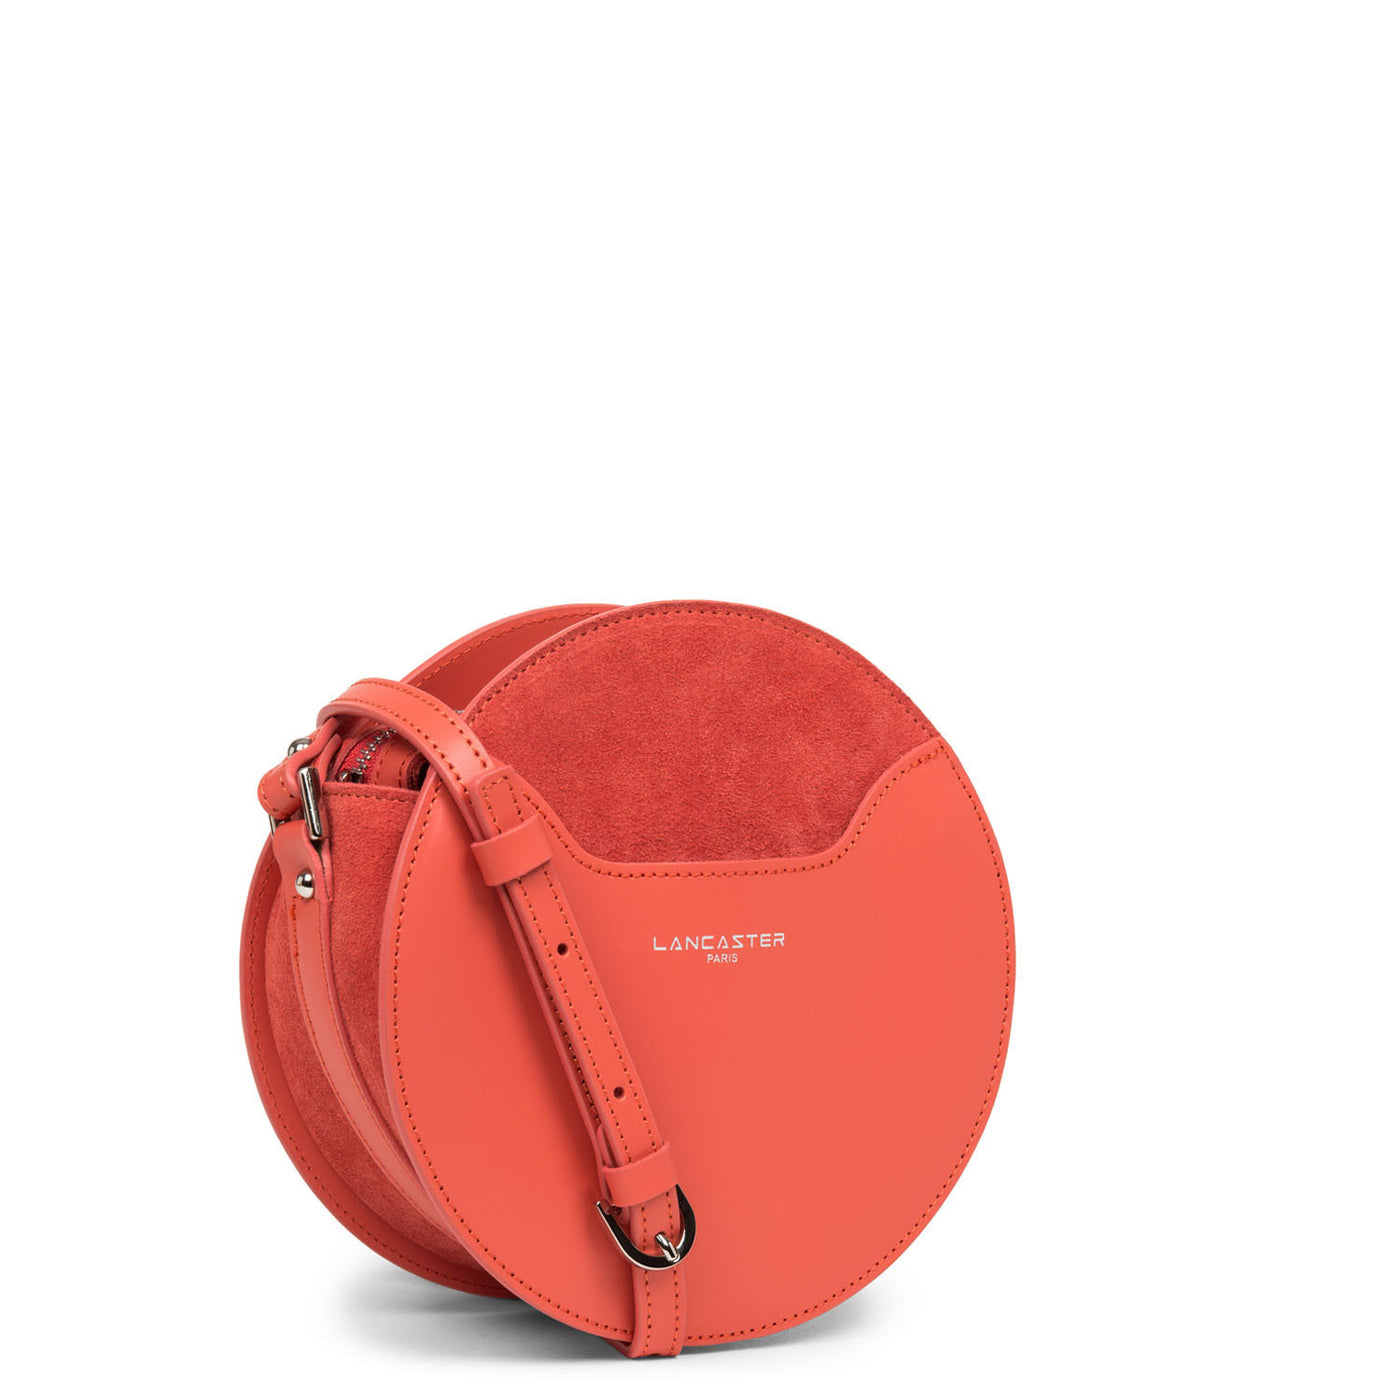 sac rond - smooth lune #couleur_corail